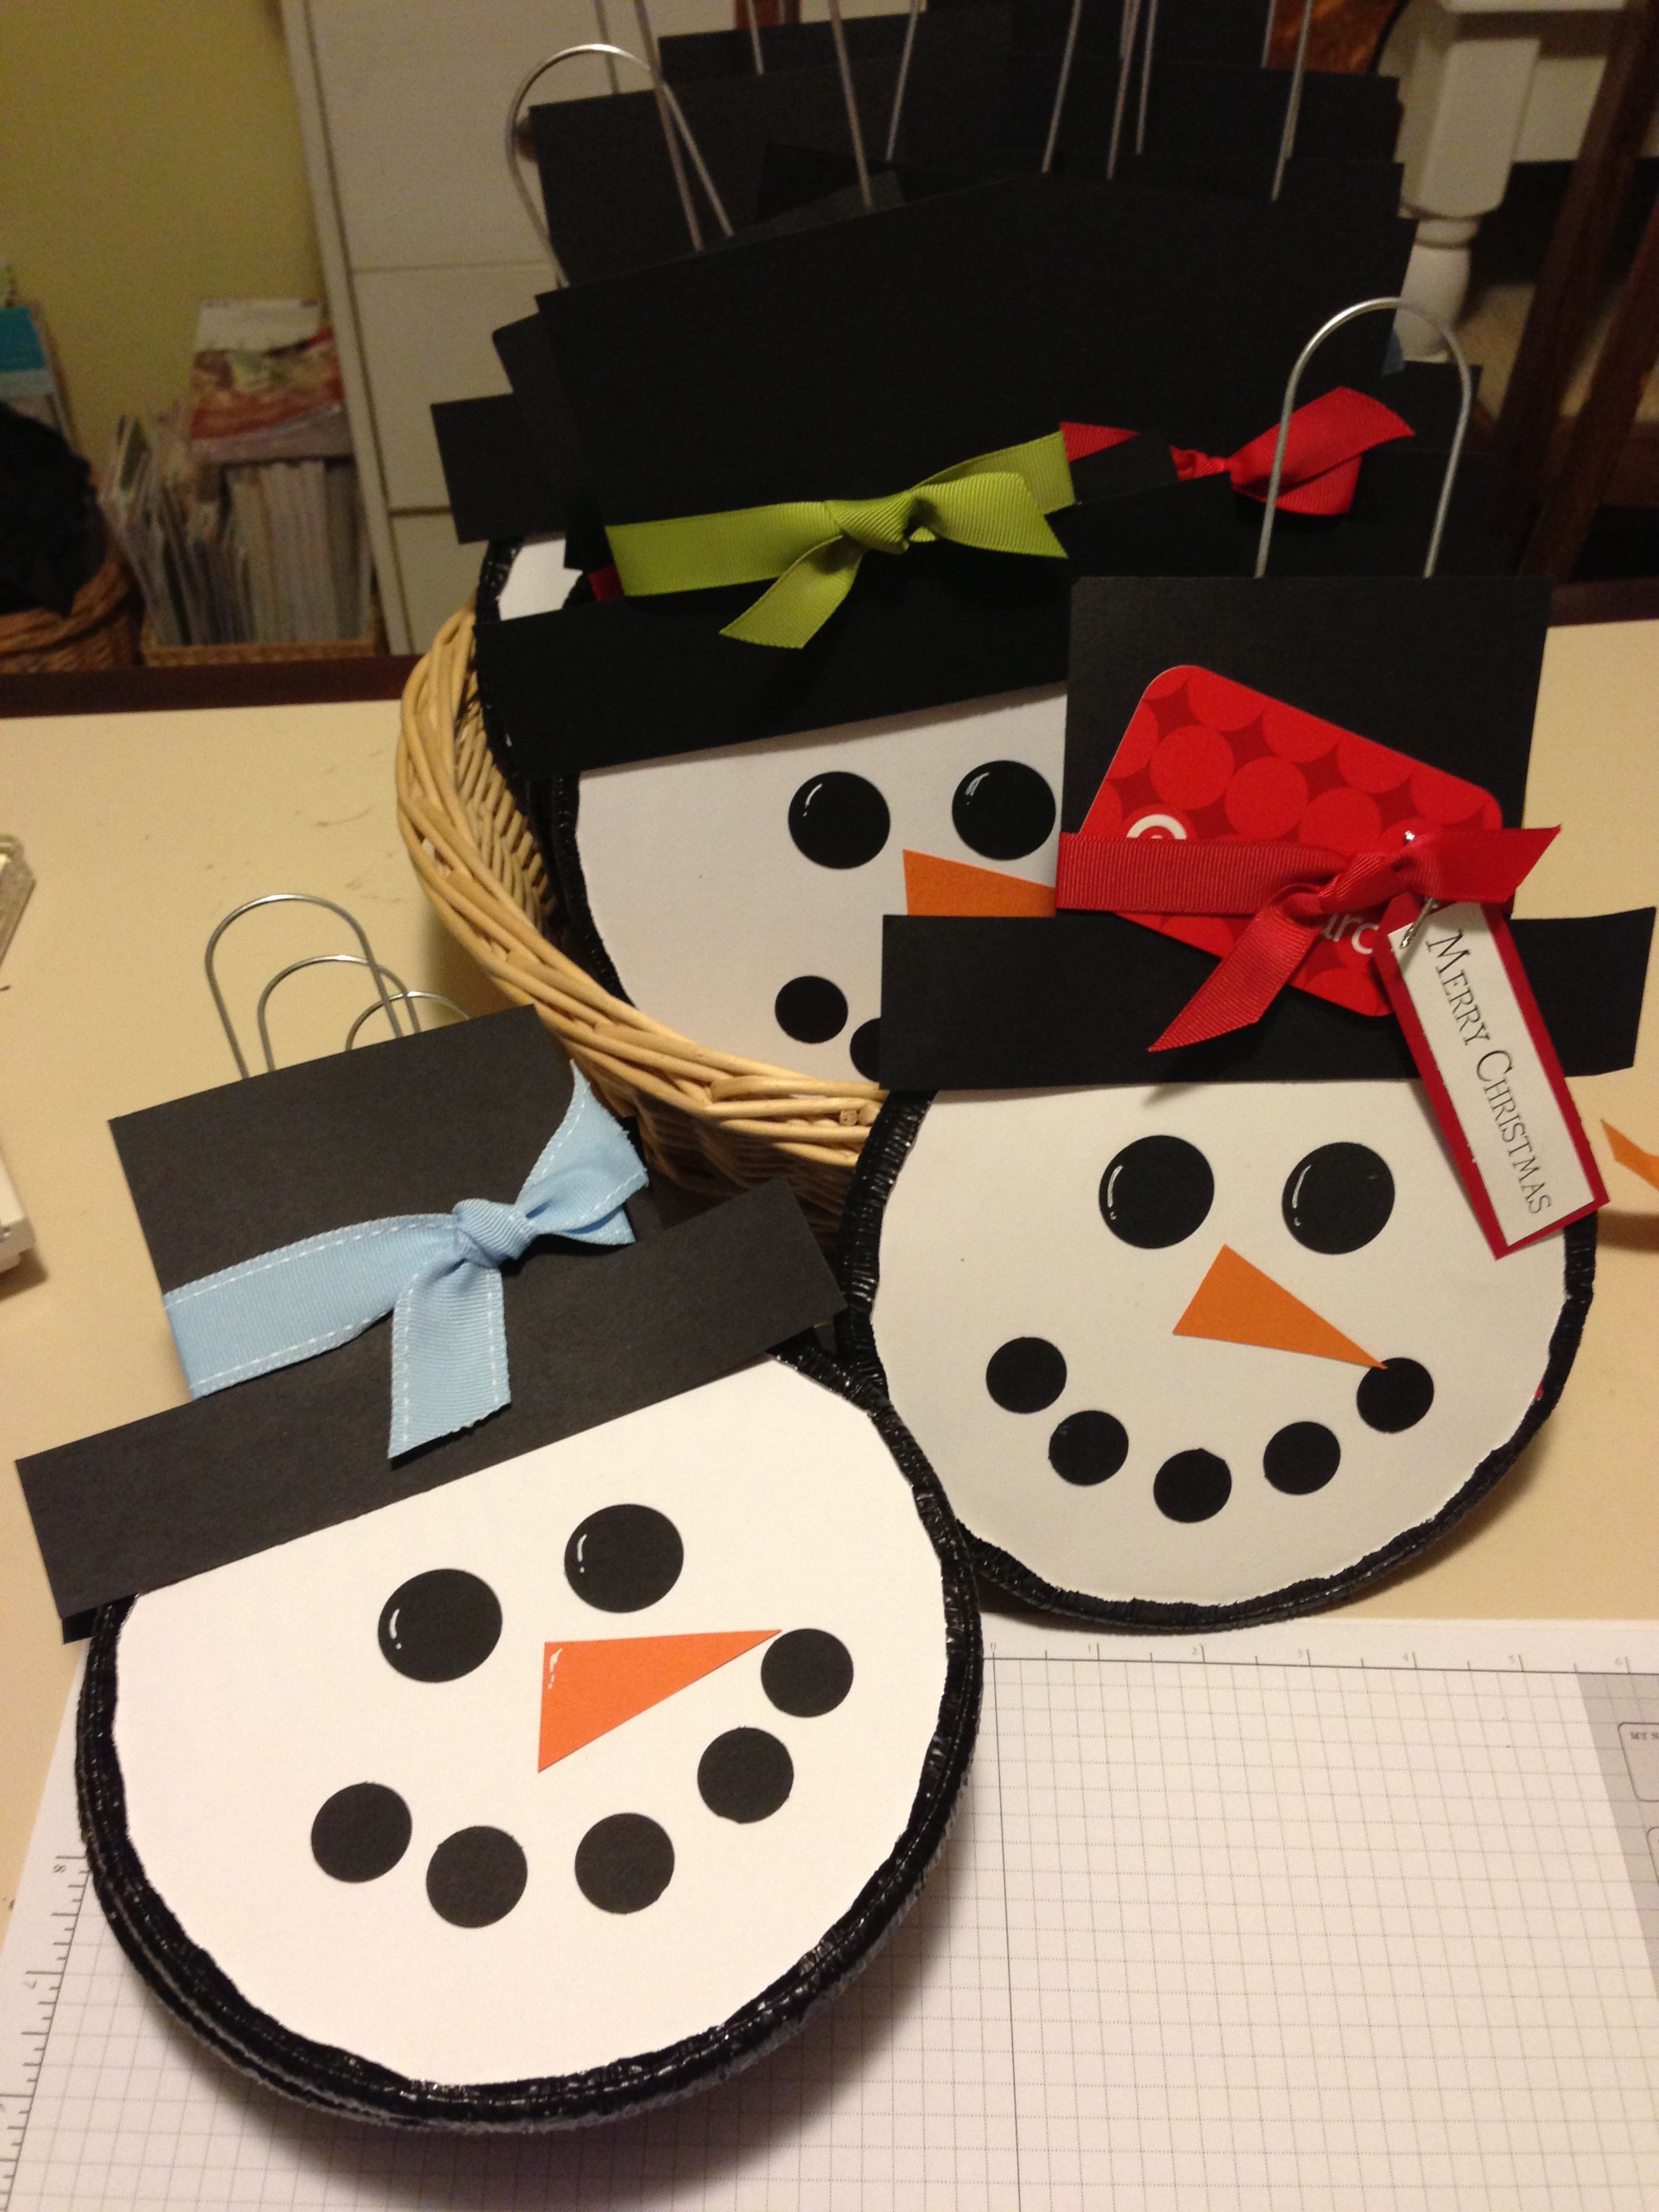 round white snowman head with black hat, black eyes, black circles for mouth and orange triangle nose